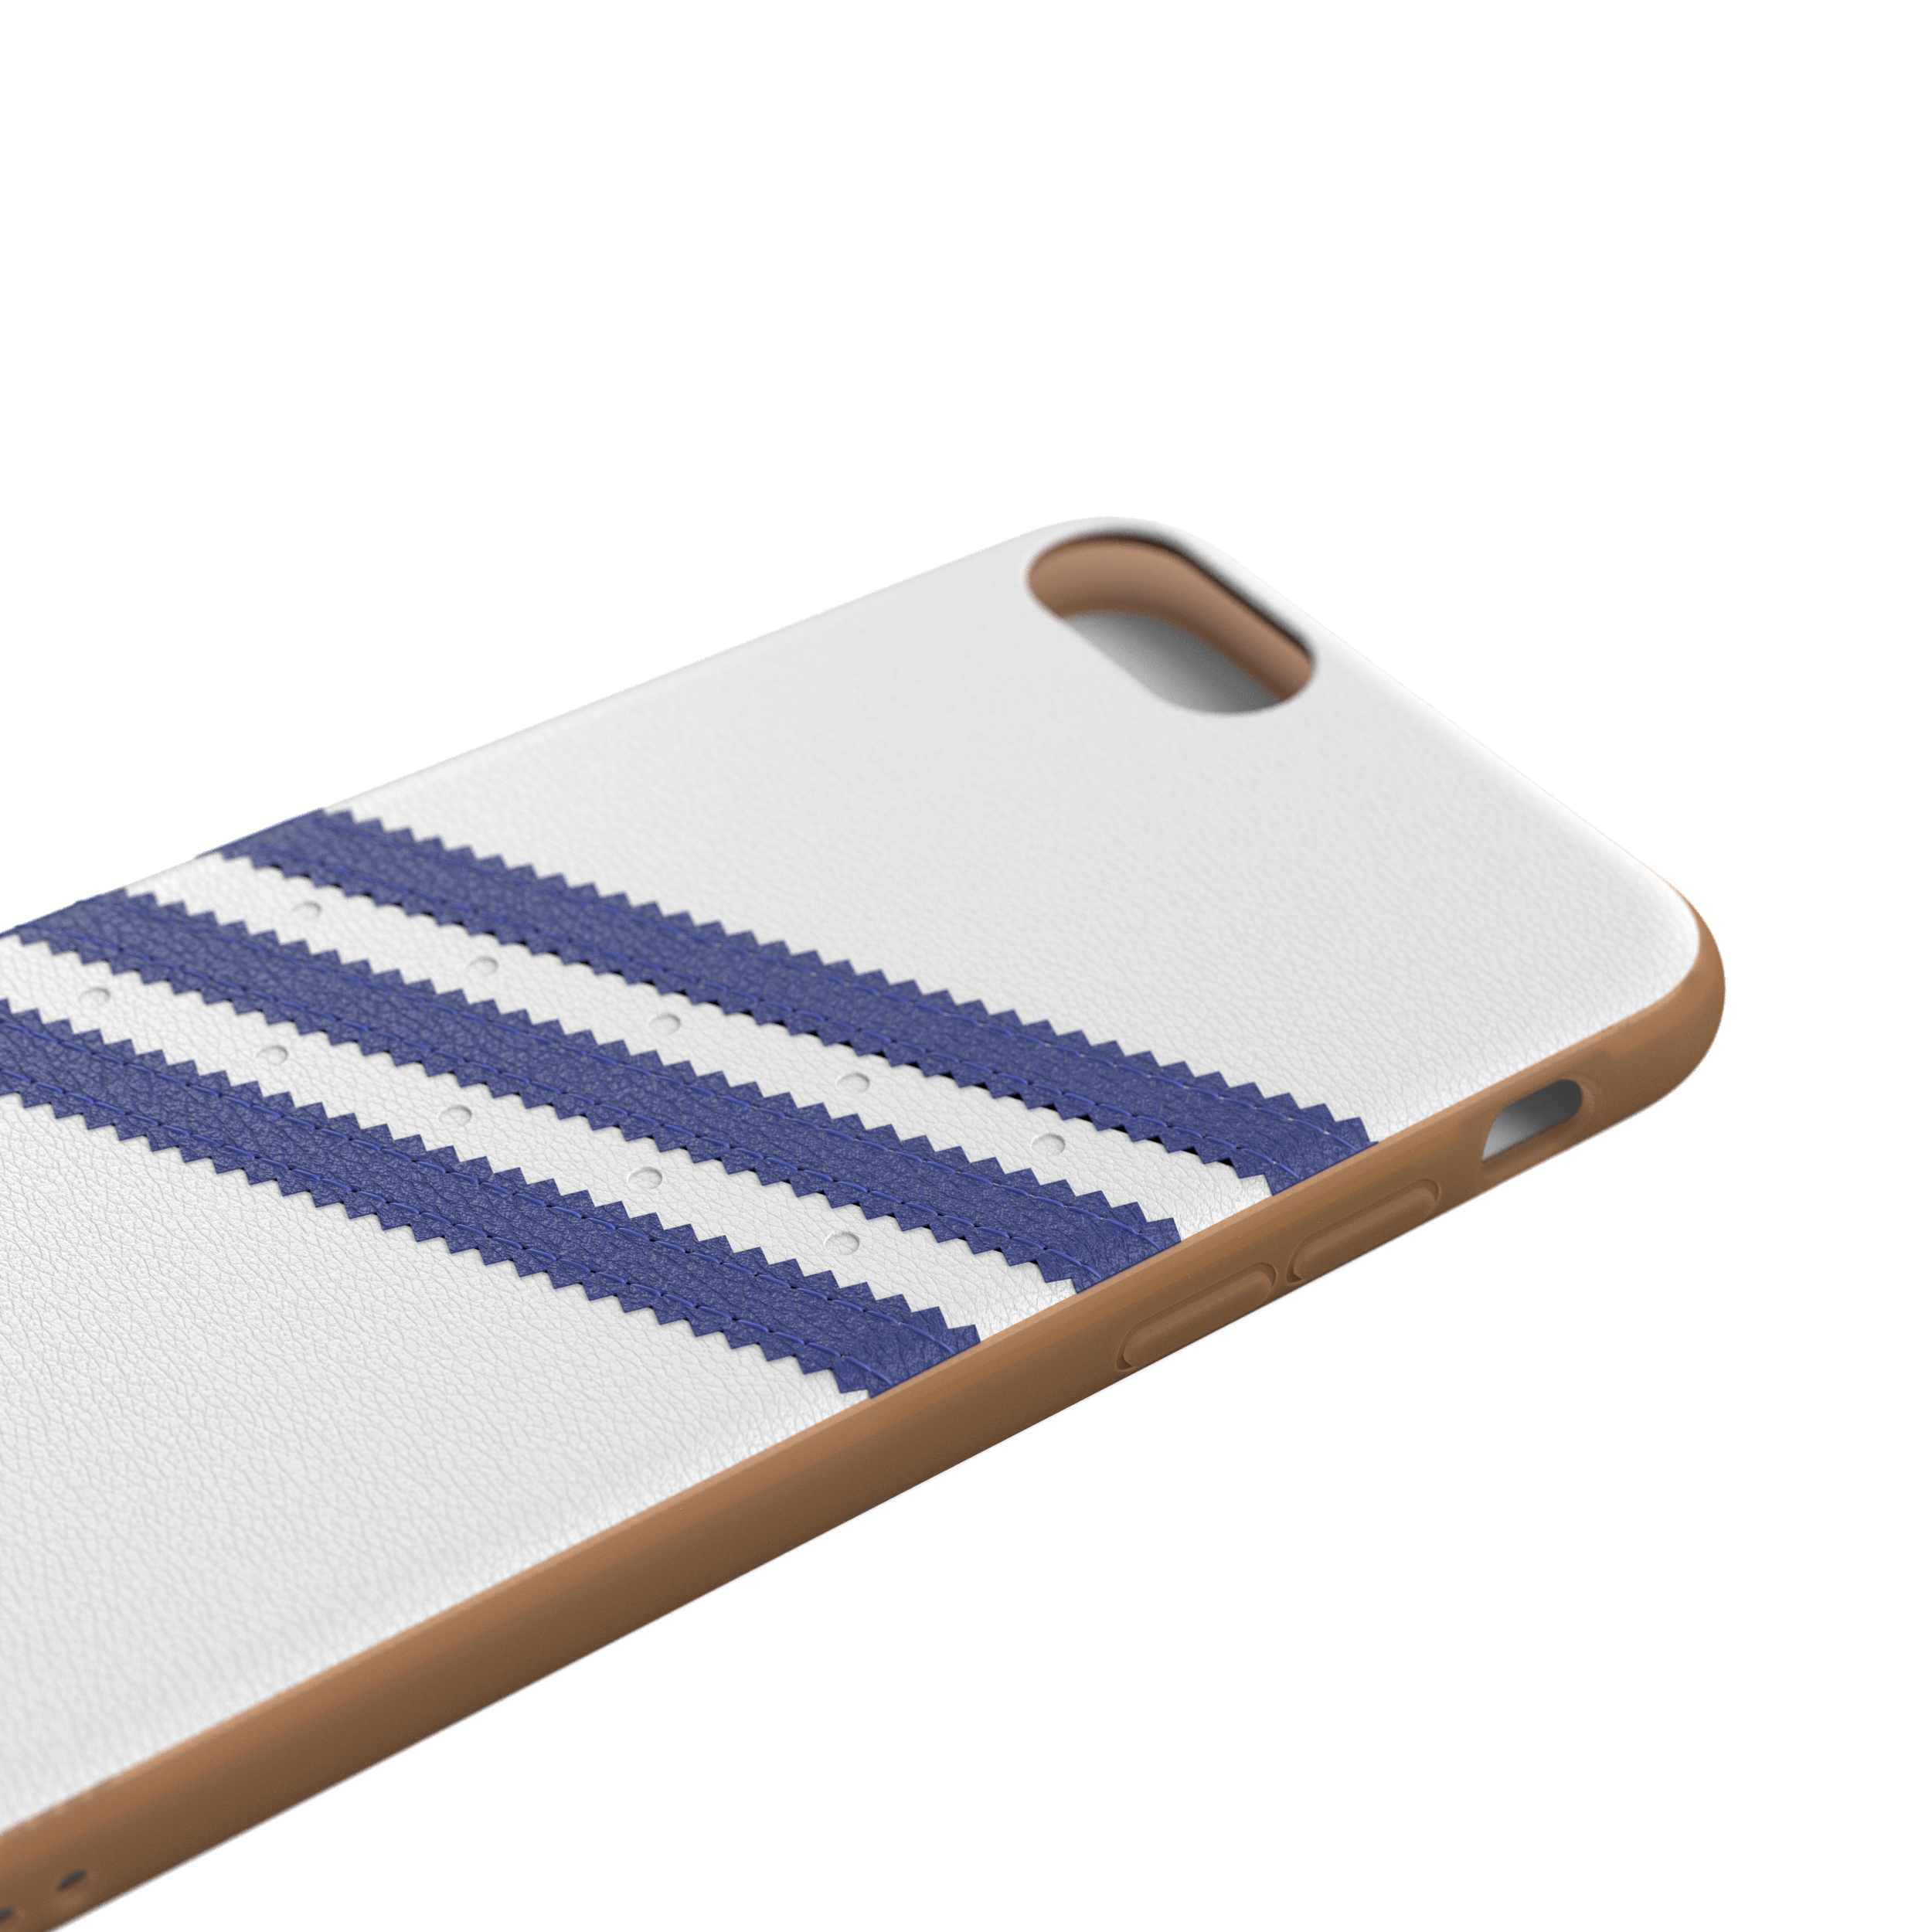 ADIDAS ORIGINALS Apple, OR (2020), 7, Moulded Weiß/Blau 8, Backcover, iPhone iPhone Case, iPhone SE 6, iPhone